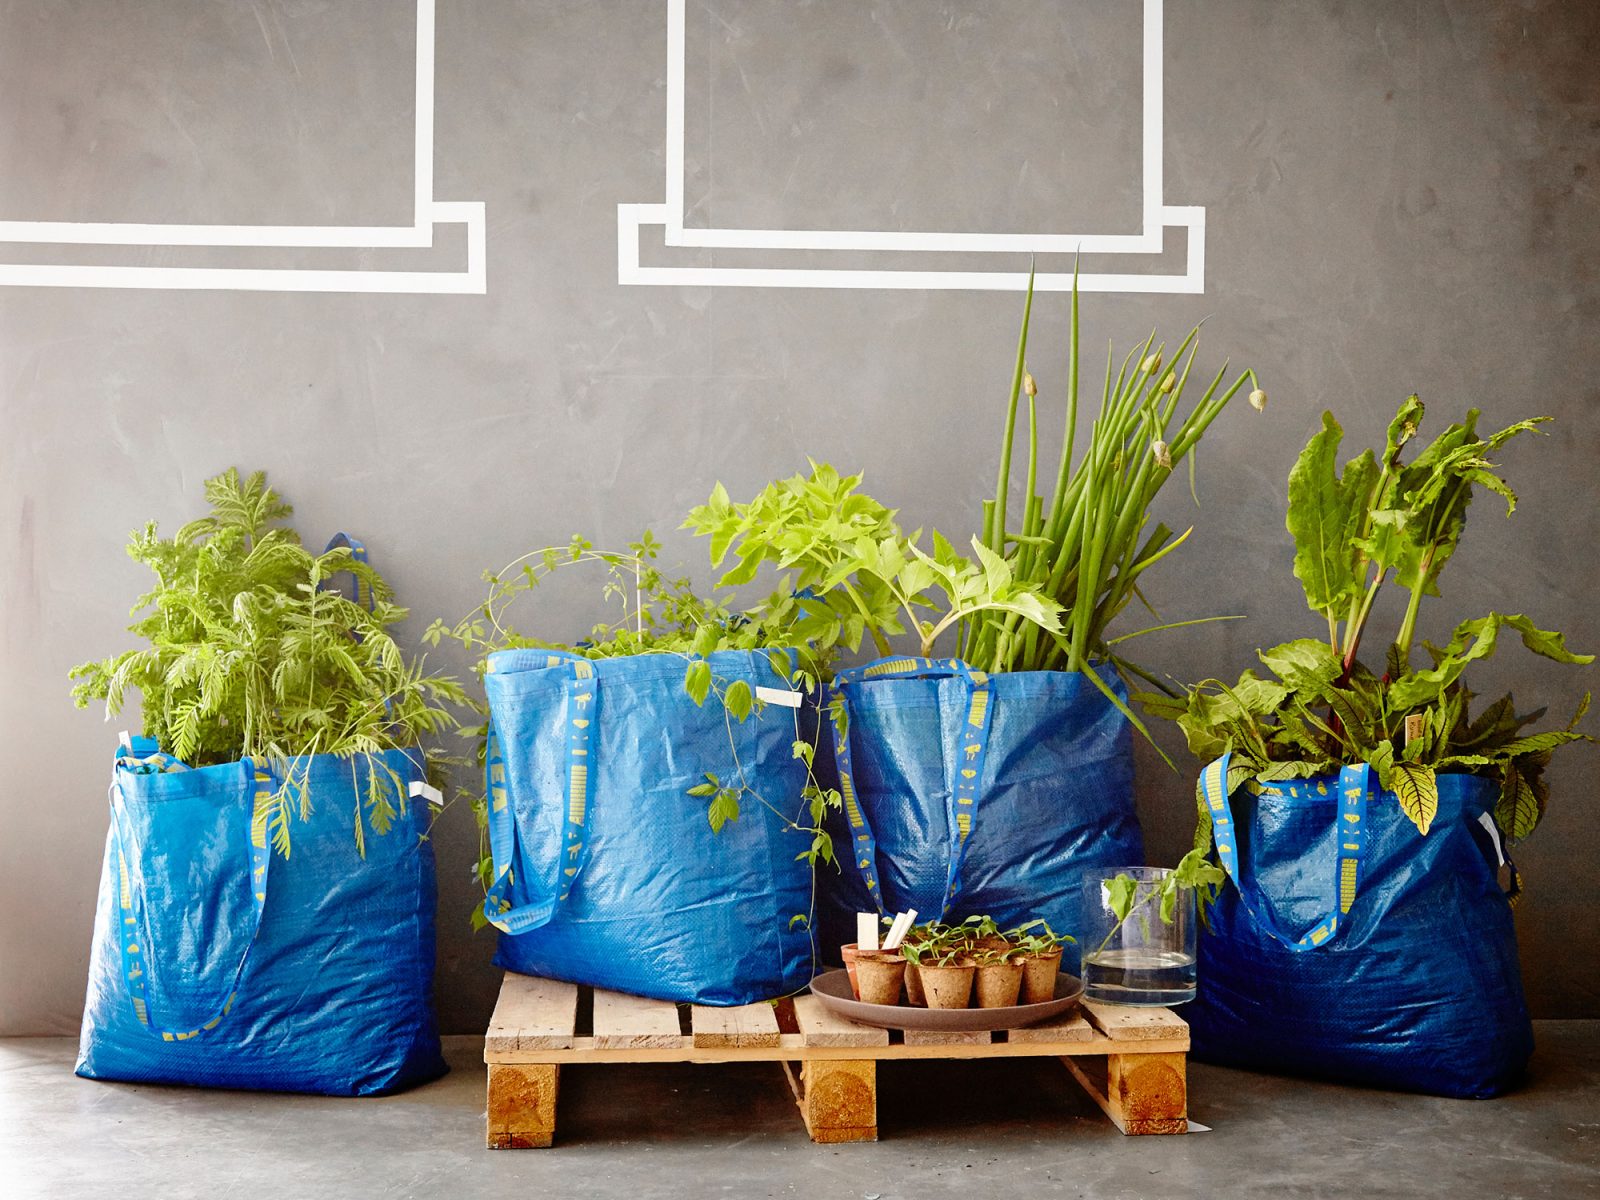 Which brand had the best response to Ikea's huge blue bag?